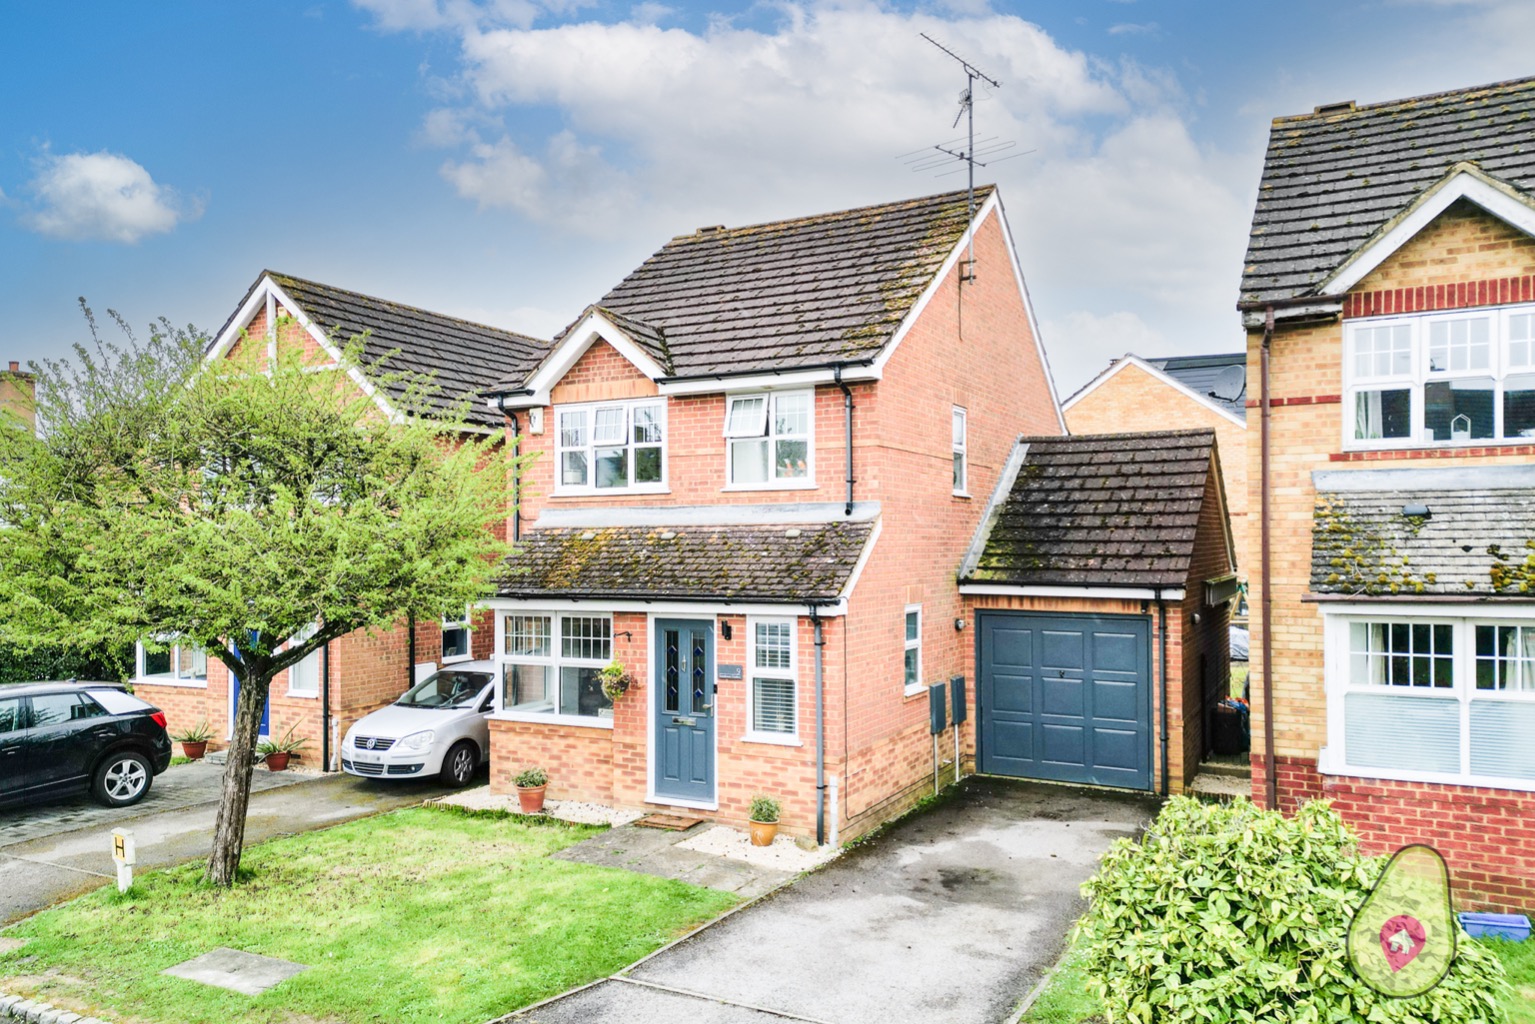 3 bed link detached house for sale in Lansdowne Gardens, Reading  - Property Image 1